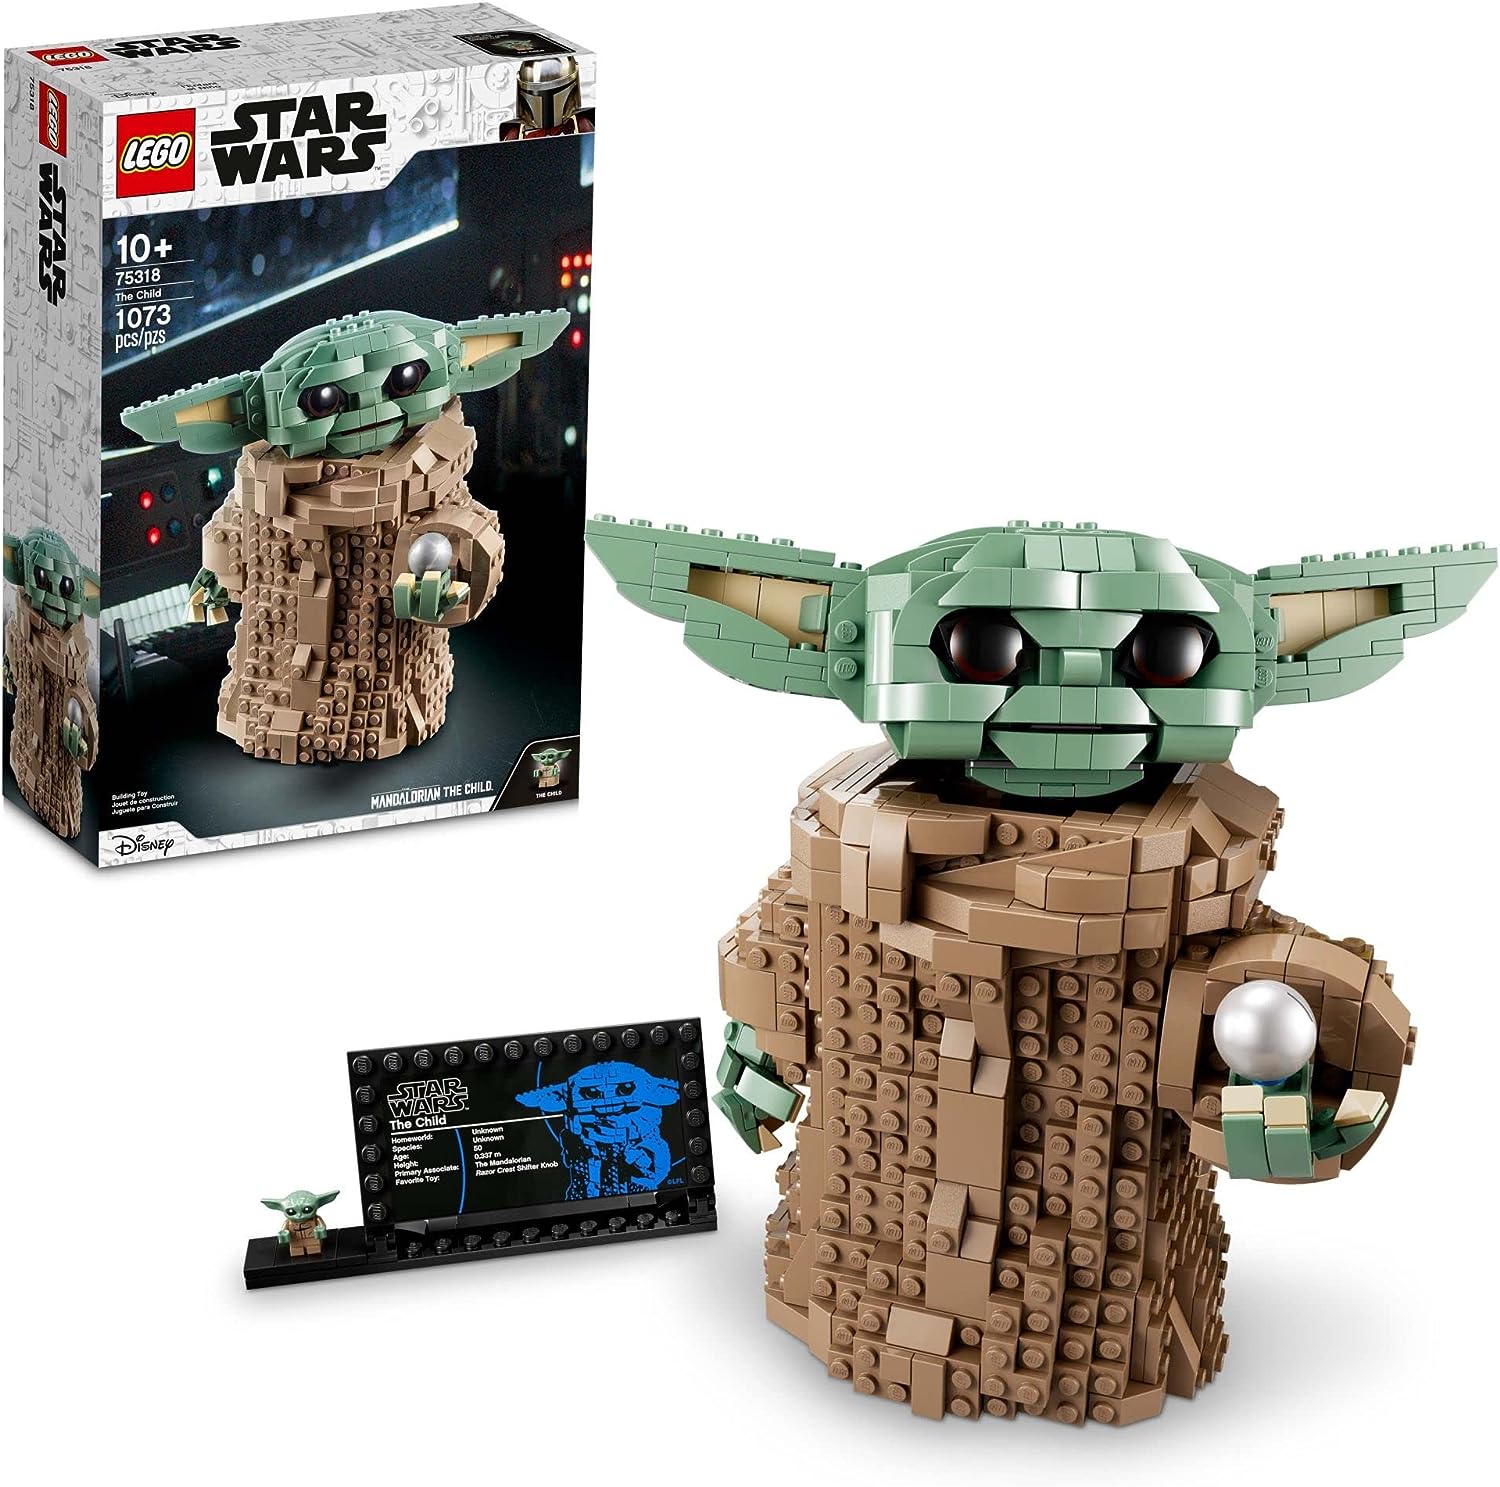 LEGO Star Wars: The Mandalorian Series The Child 75318 - Baby Yoda Grogu Figure, Building Toy, Collectible Room Decoration for Boys and Girls, Teens, with Minifigure and  - $45.00